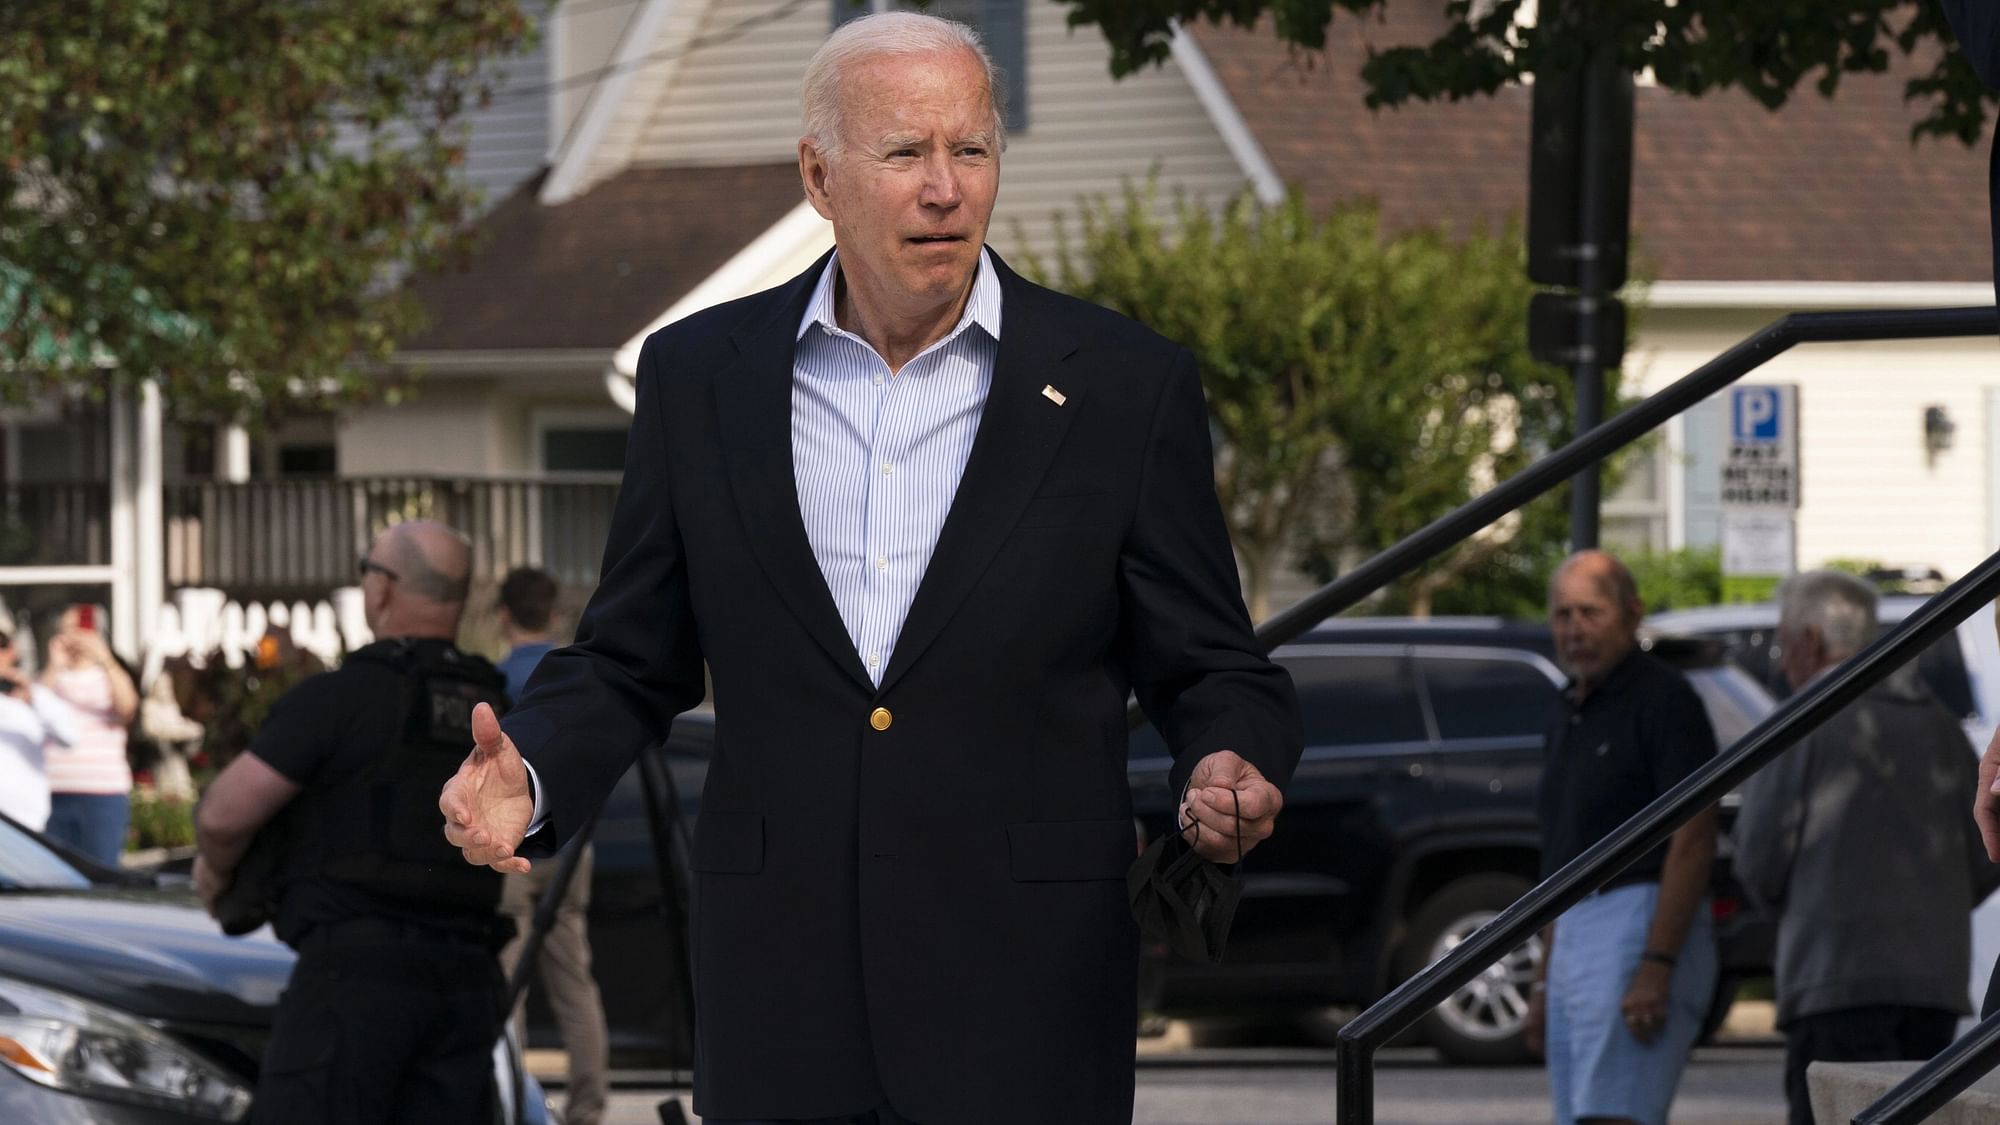 <div class="paragraphs"><p>President Joe Biden reacts when asked how he was feeling as he leaves St Edmund Roman Catholic Church in Rehoboth Beach, Delaware, after attending a Mass on Saturday, 18 June. </p></div>